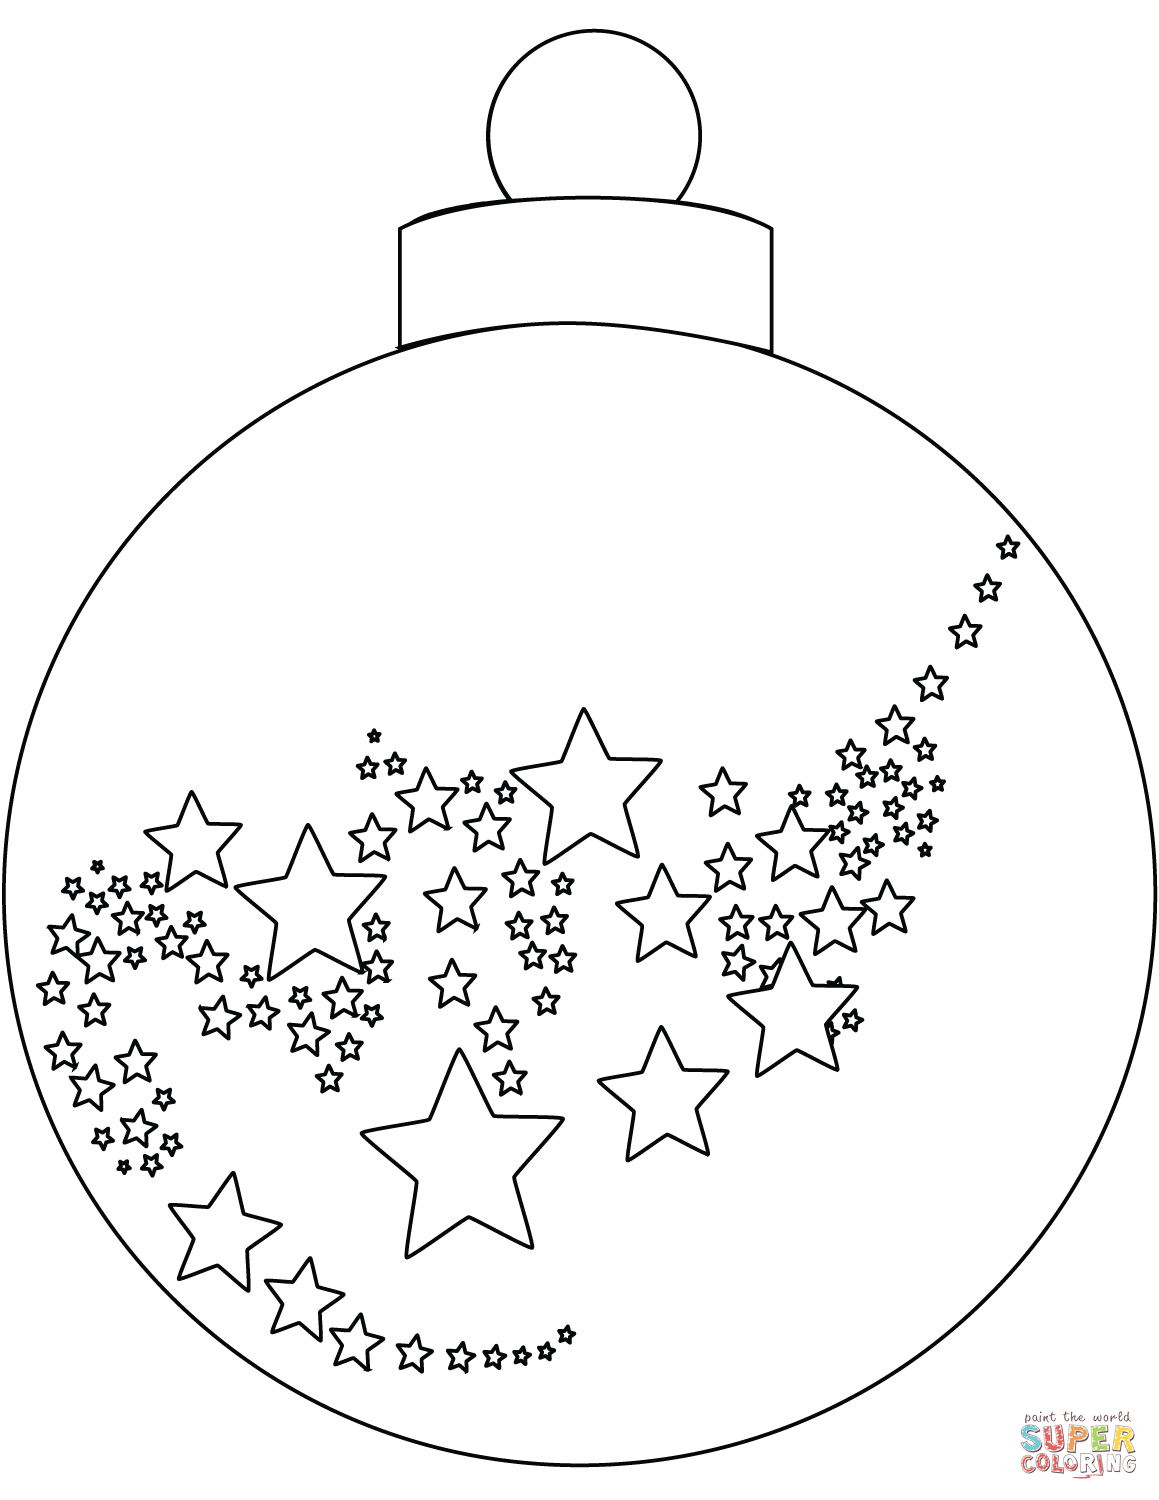 Christmas Ornament Coloring Page | Free Printable Coloring Pages - Free Printable Christmas Ornament Coloring Pages